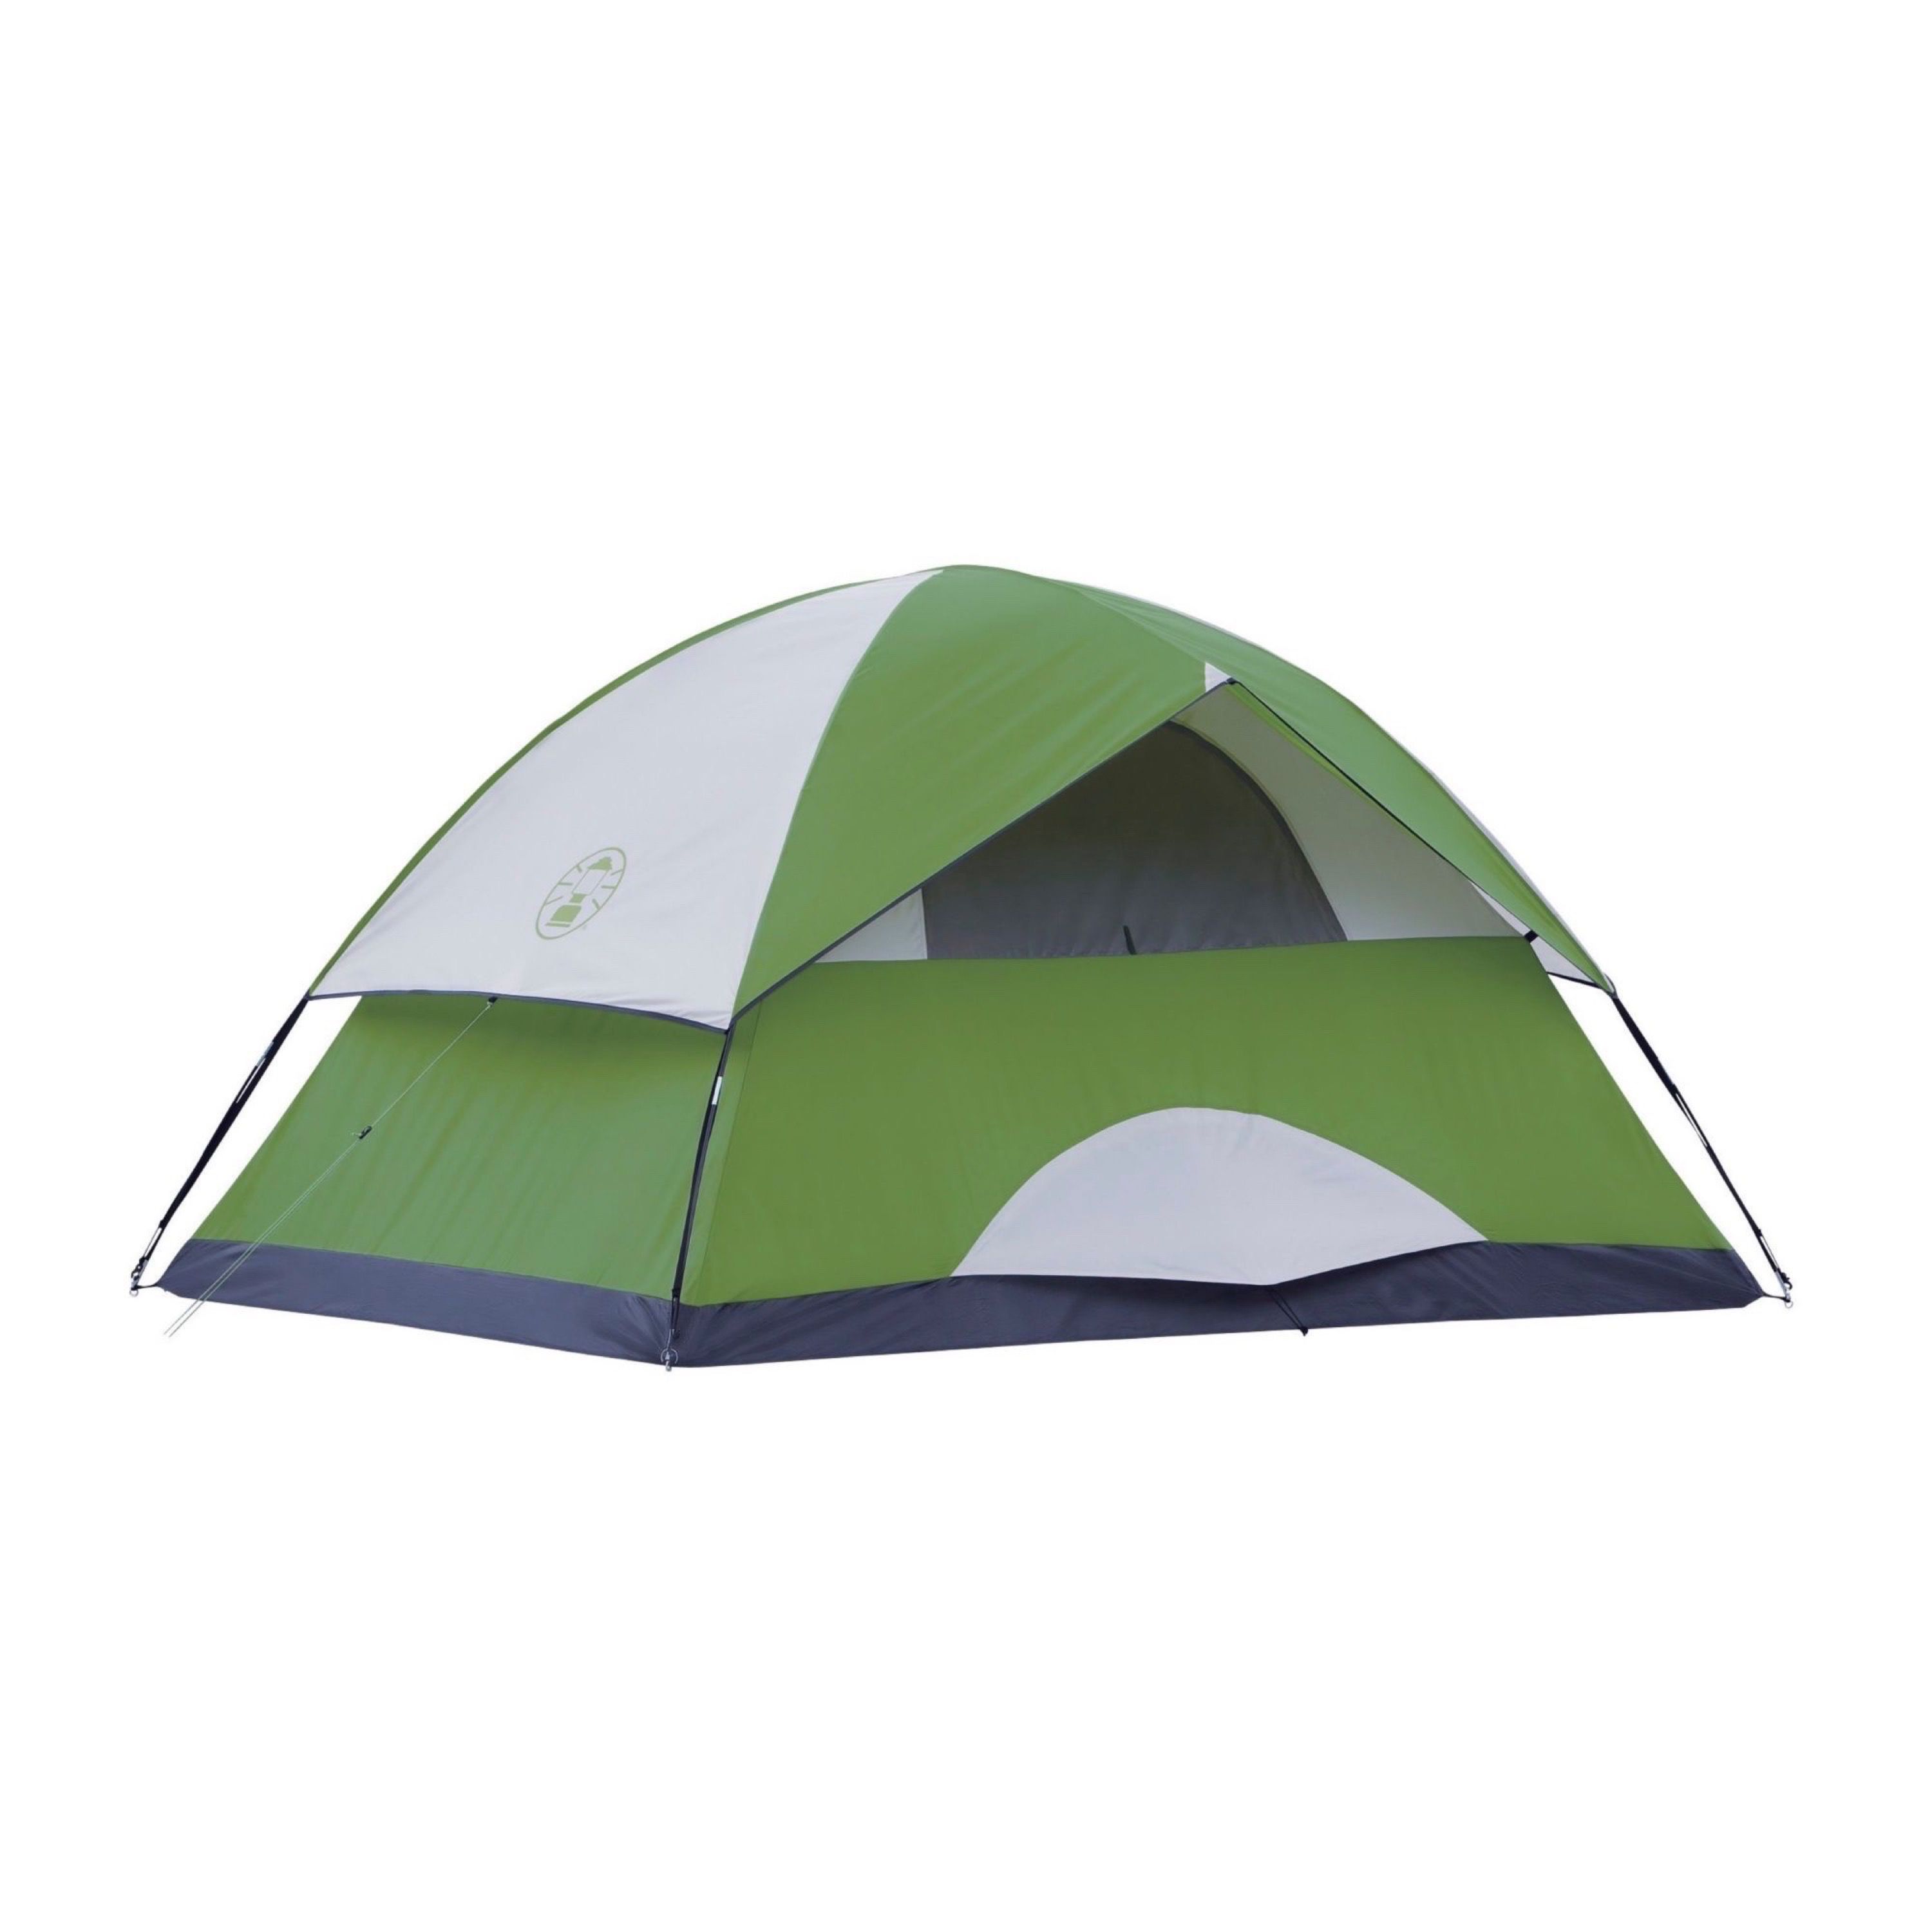 Coleman 3-Person Dome Tent - image 3 of 7